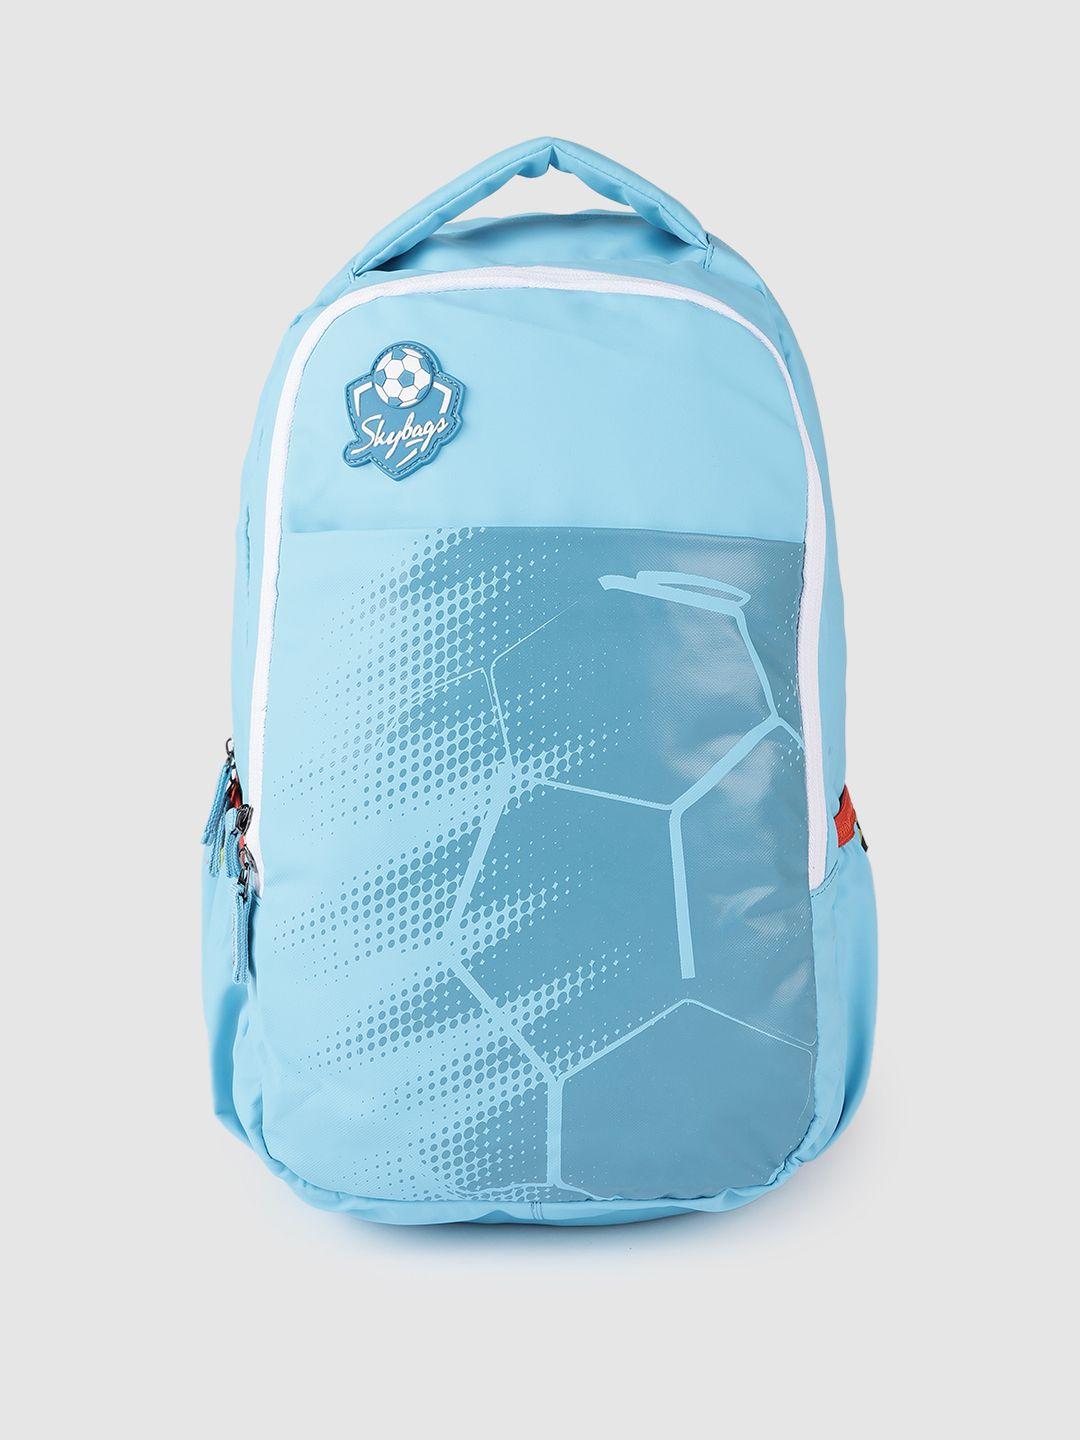 skybags unisex blue graphic printed backpack with rain cover